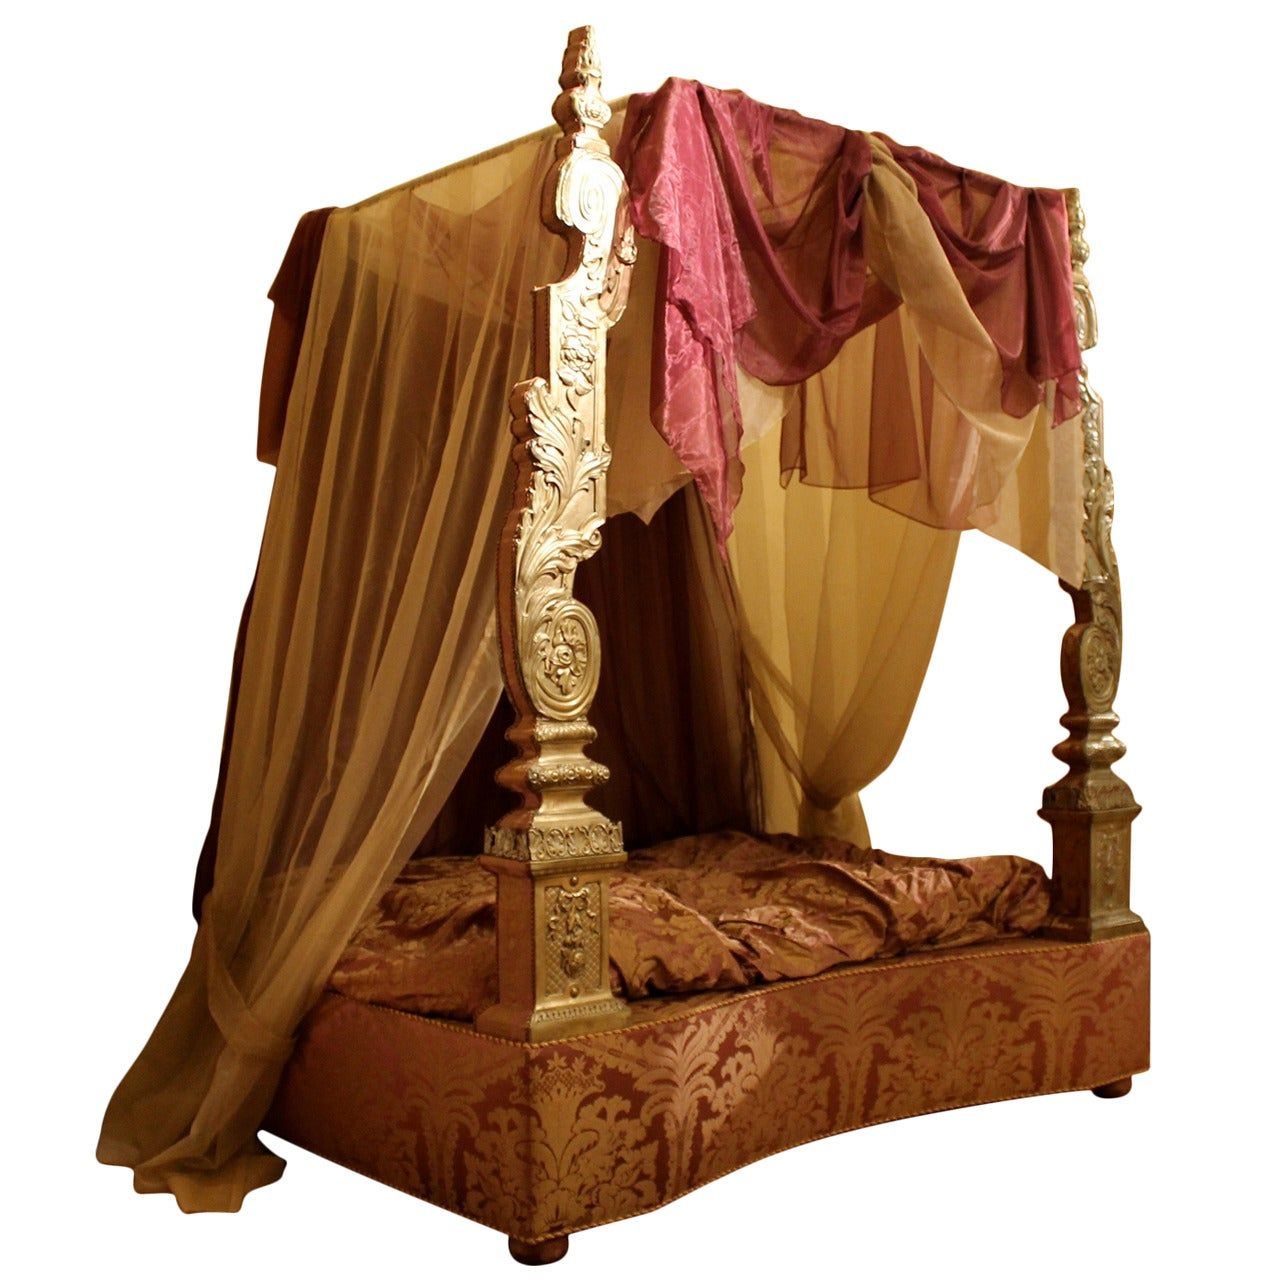 The Charm of 19th Century Canopy Beds: A Glimpse into Elegant Slumber